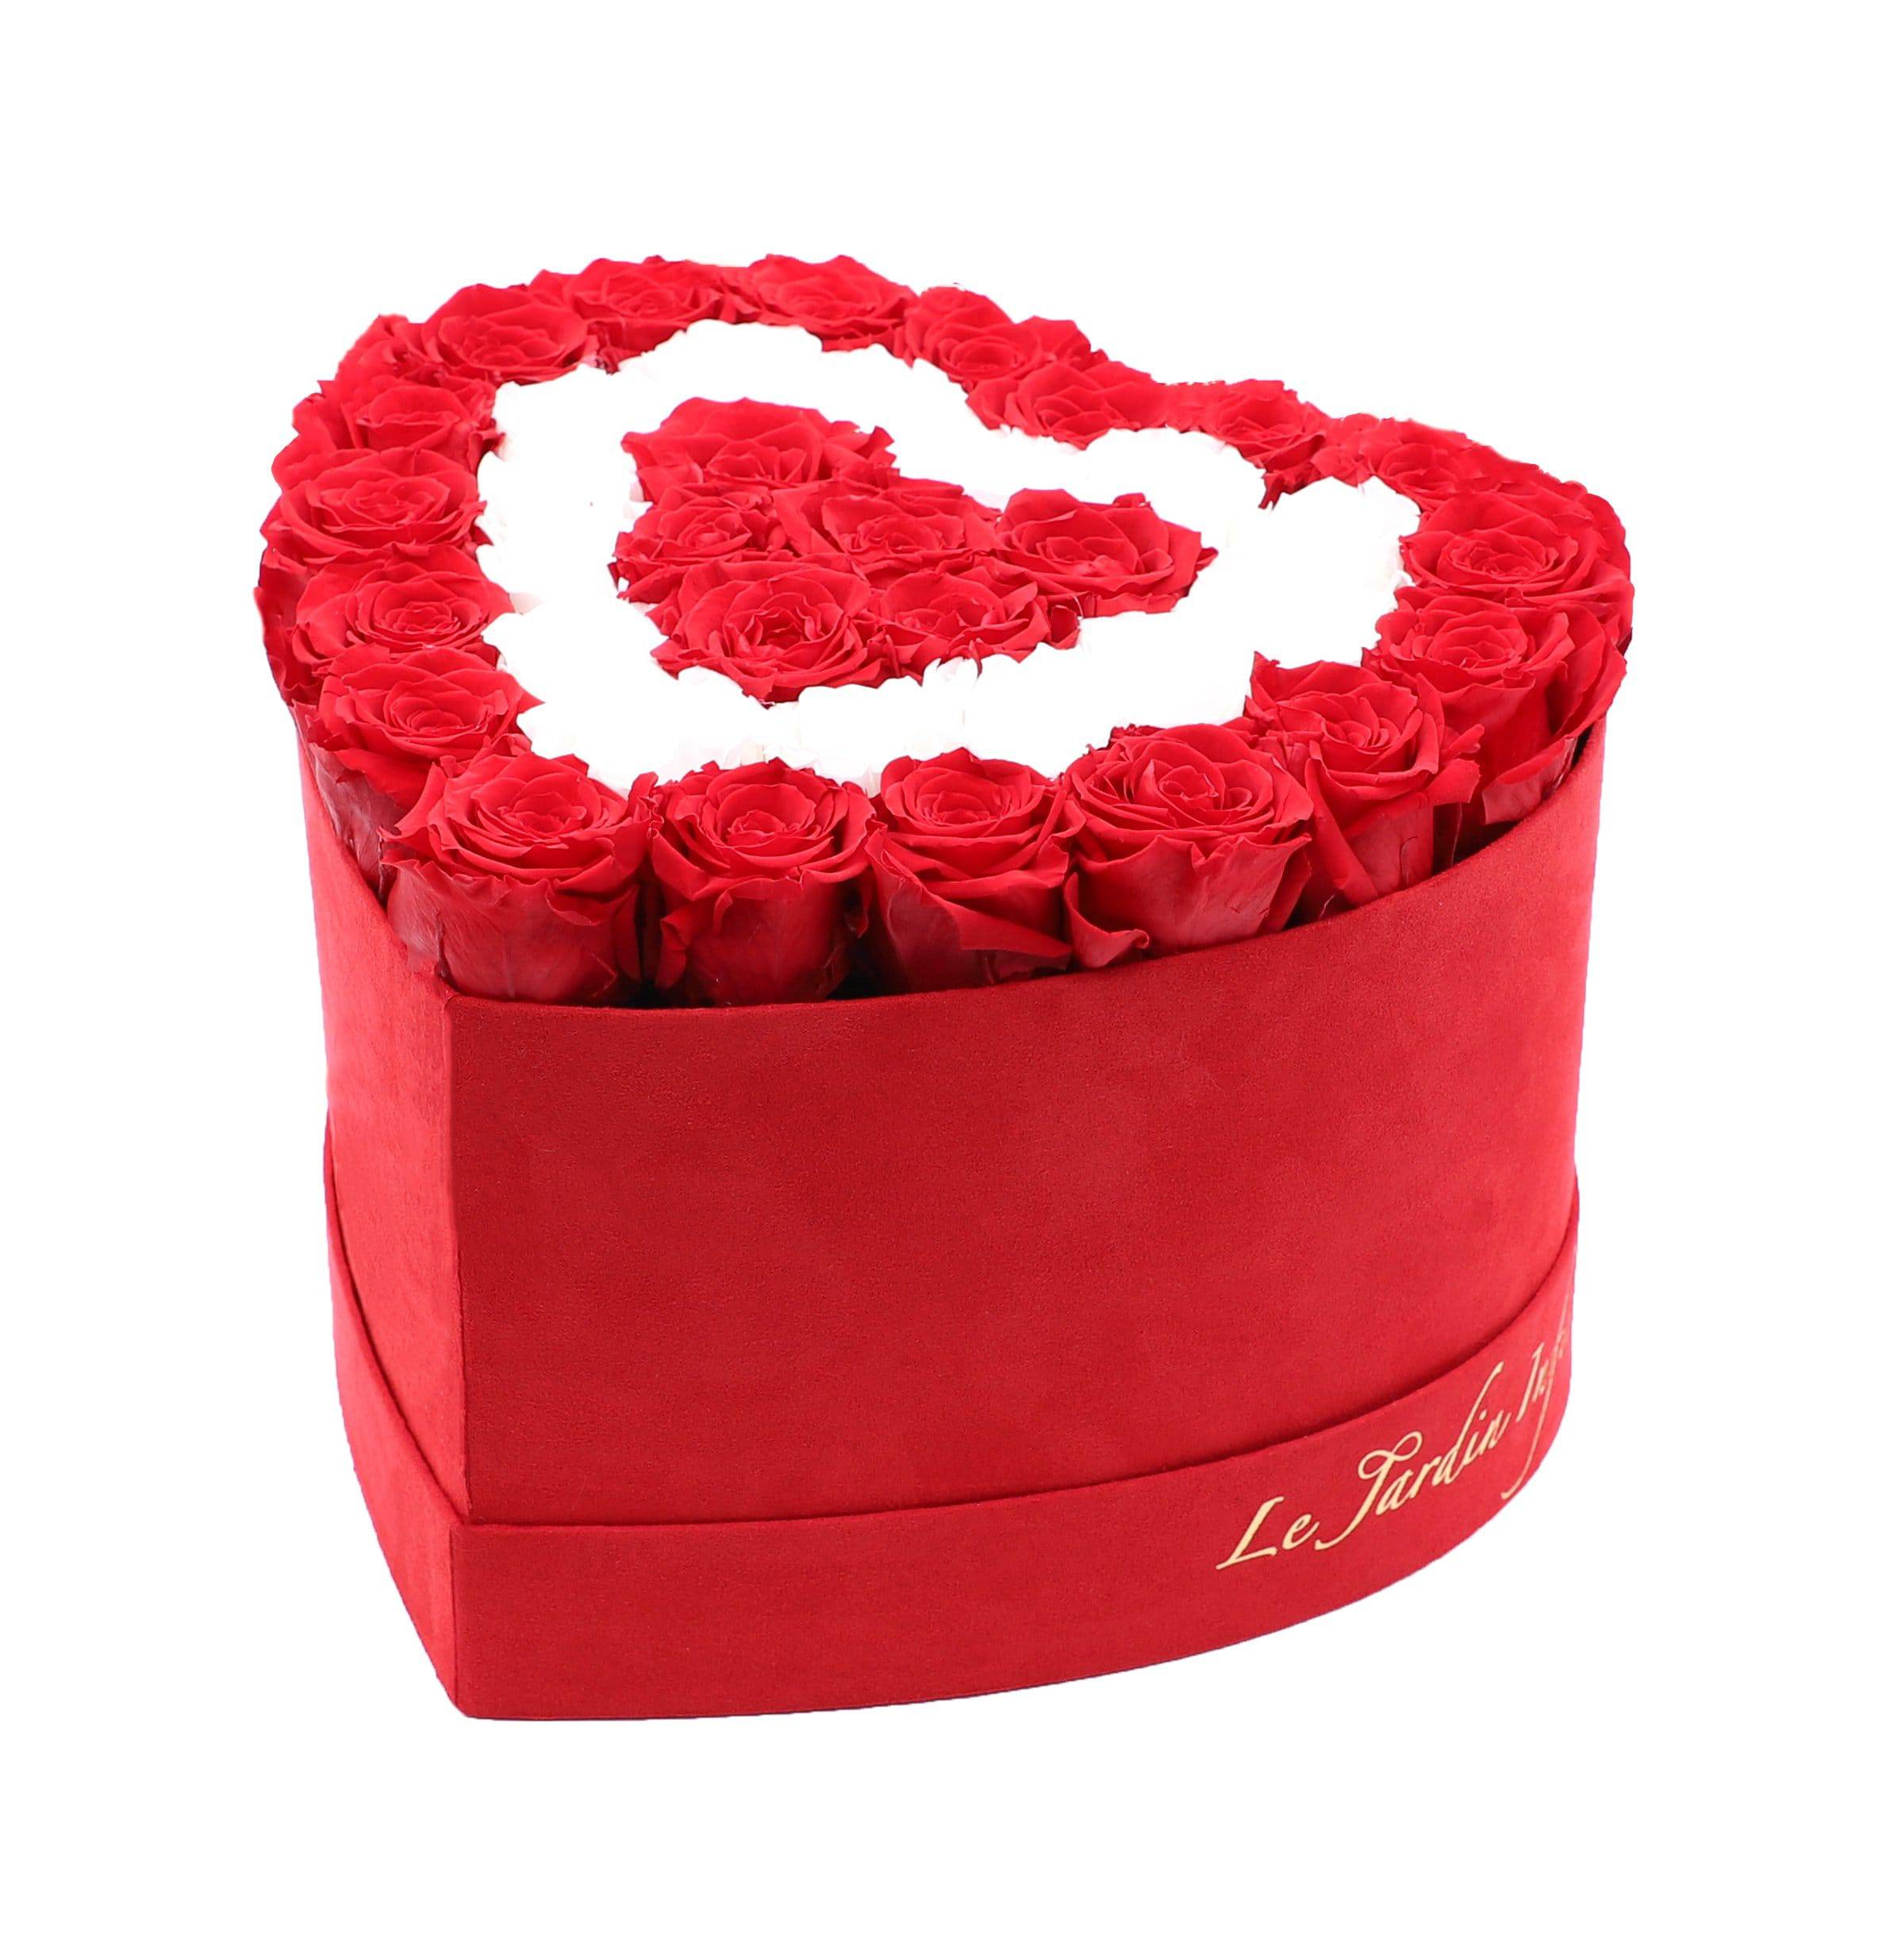 Flowers for Mother’s Day delivery 36 Red & White Hearts in A Heart Shaped Box- Small Heart Luxury Red Suede Box - Le Jardin Infini Roses in a Box